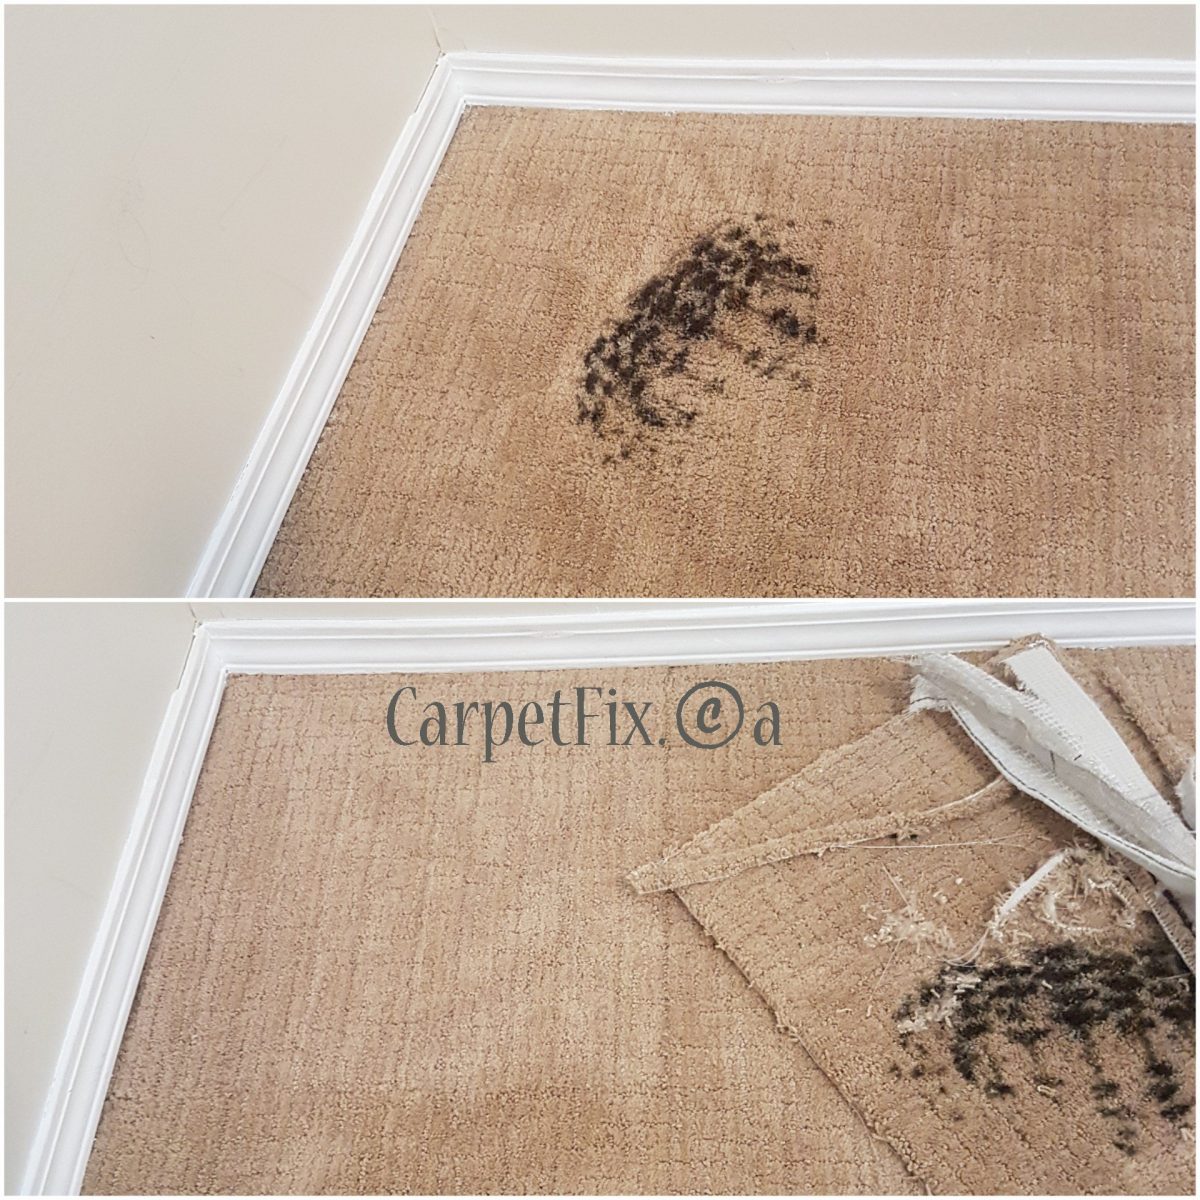 Carpet stain removal is done by #1 shop in Calgary